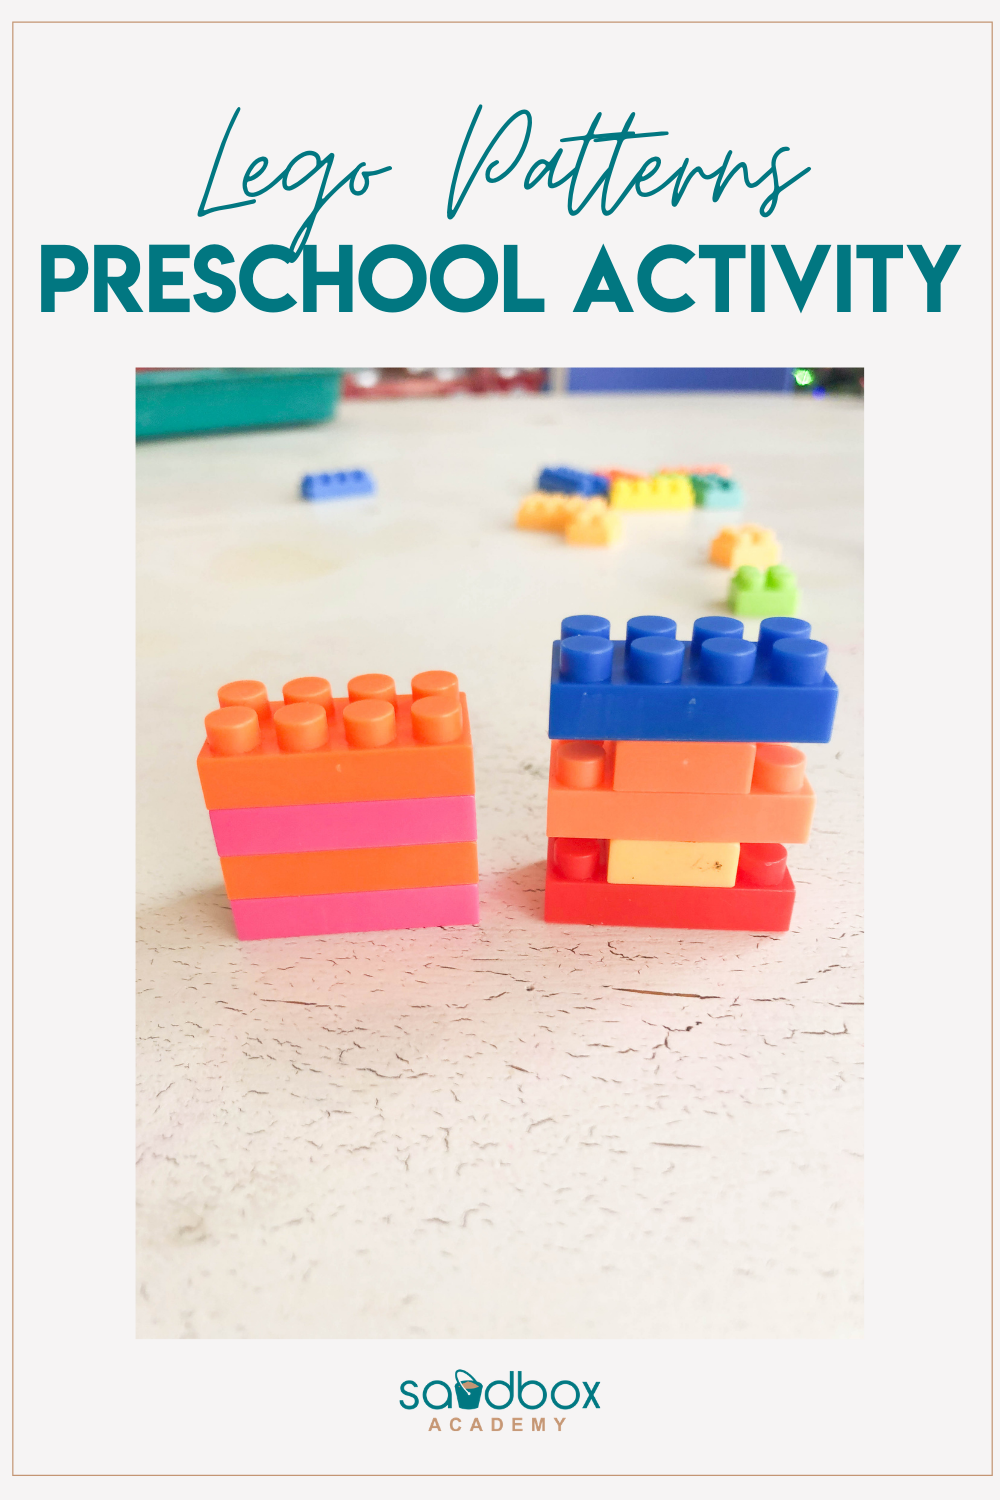 Legos stacked in a pattern based on their color and size text reads Lego patterns preschool activity